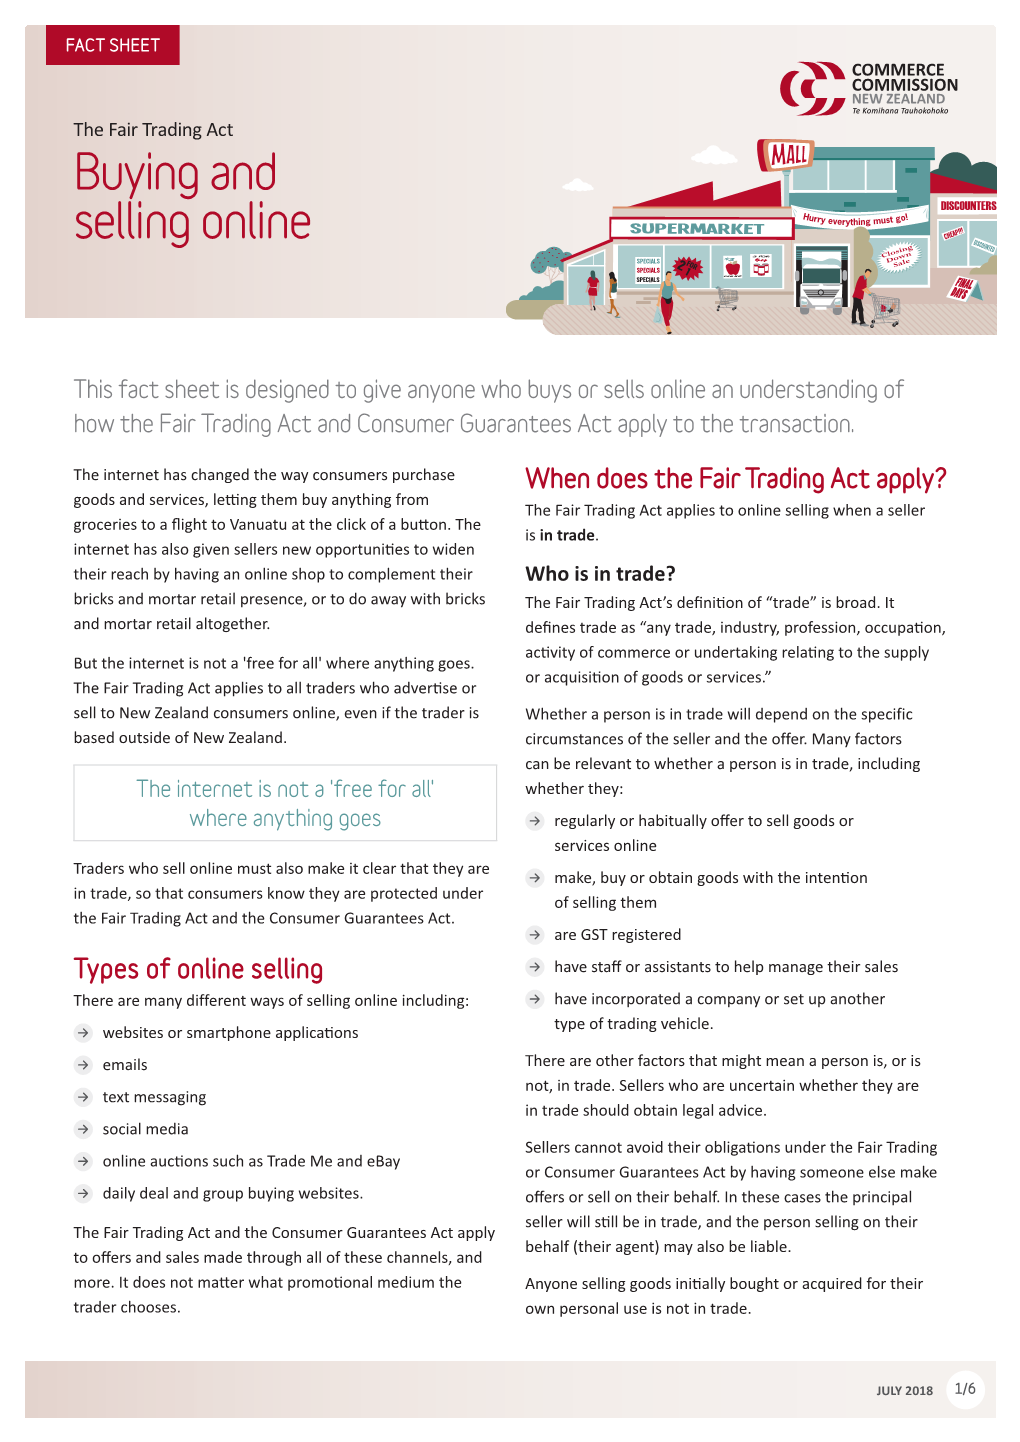 Buying and Selling Online – Fact Sheet – July 2018